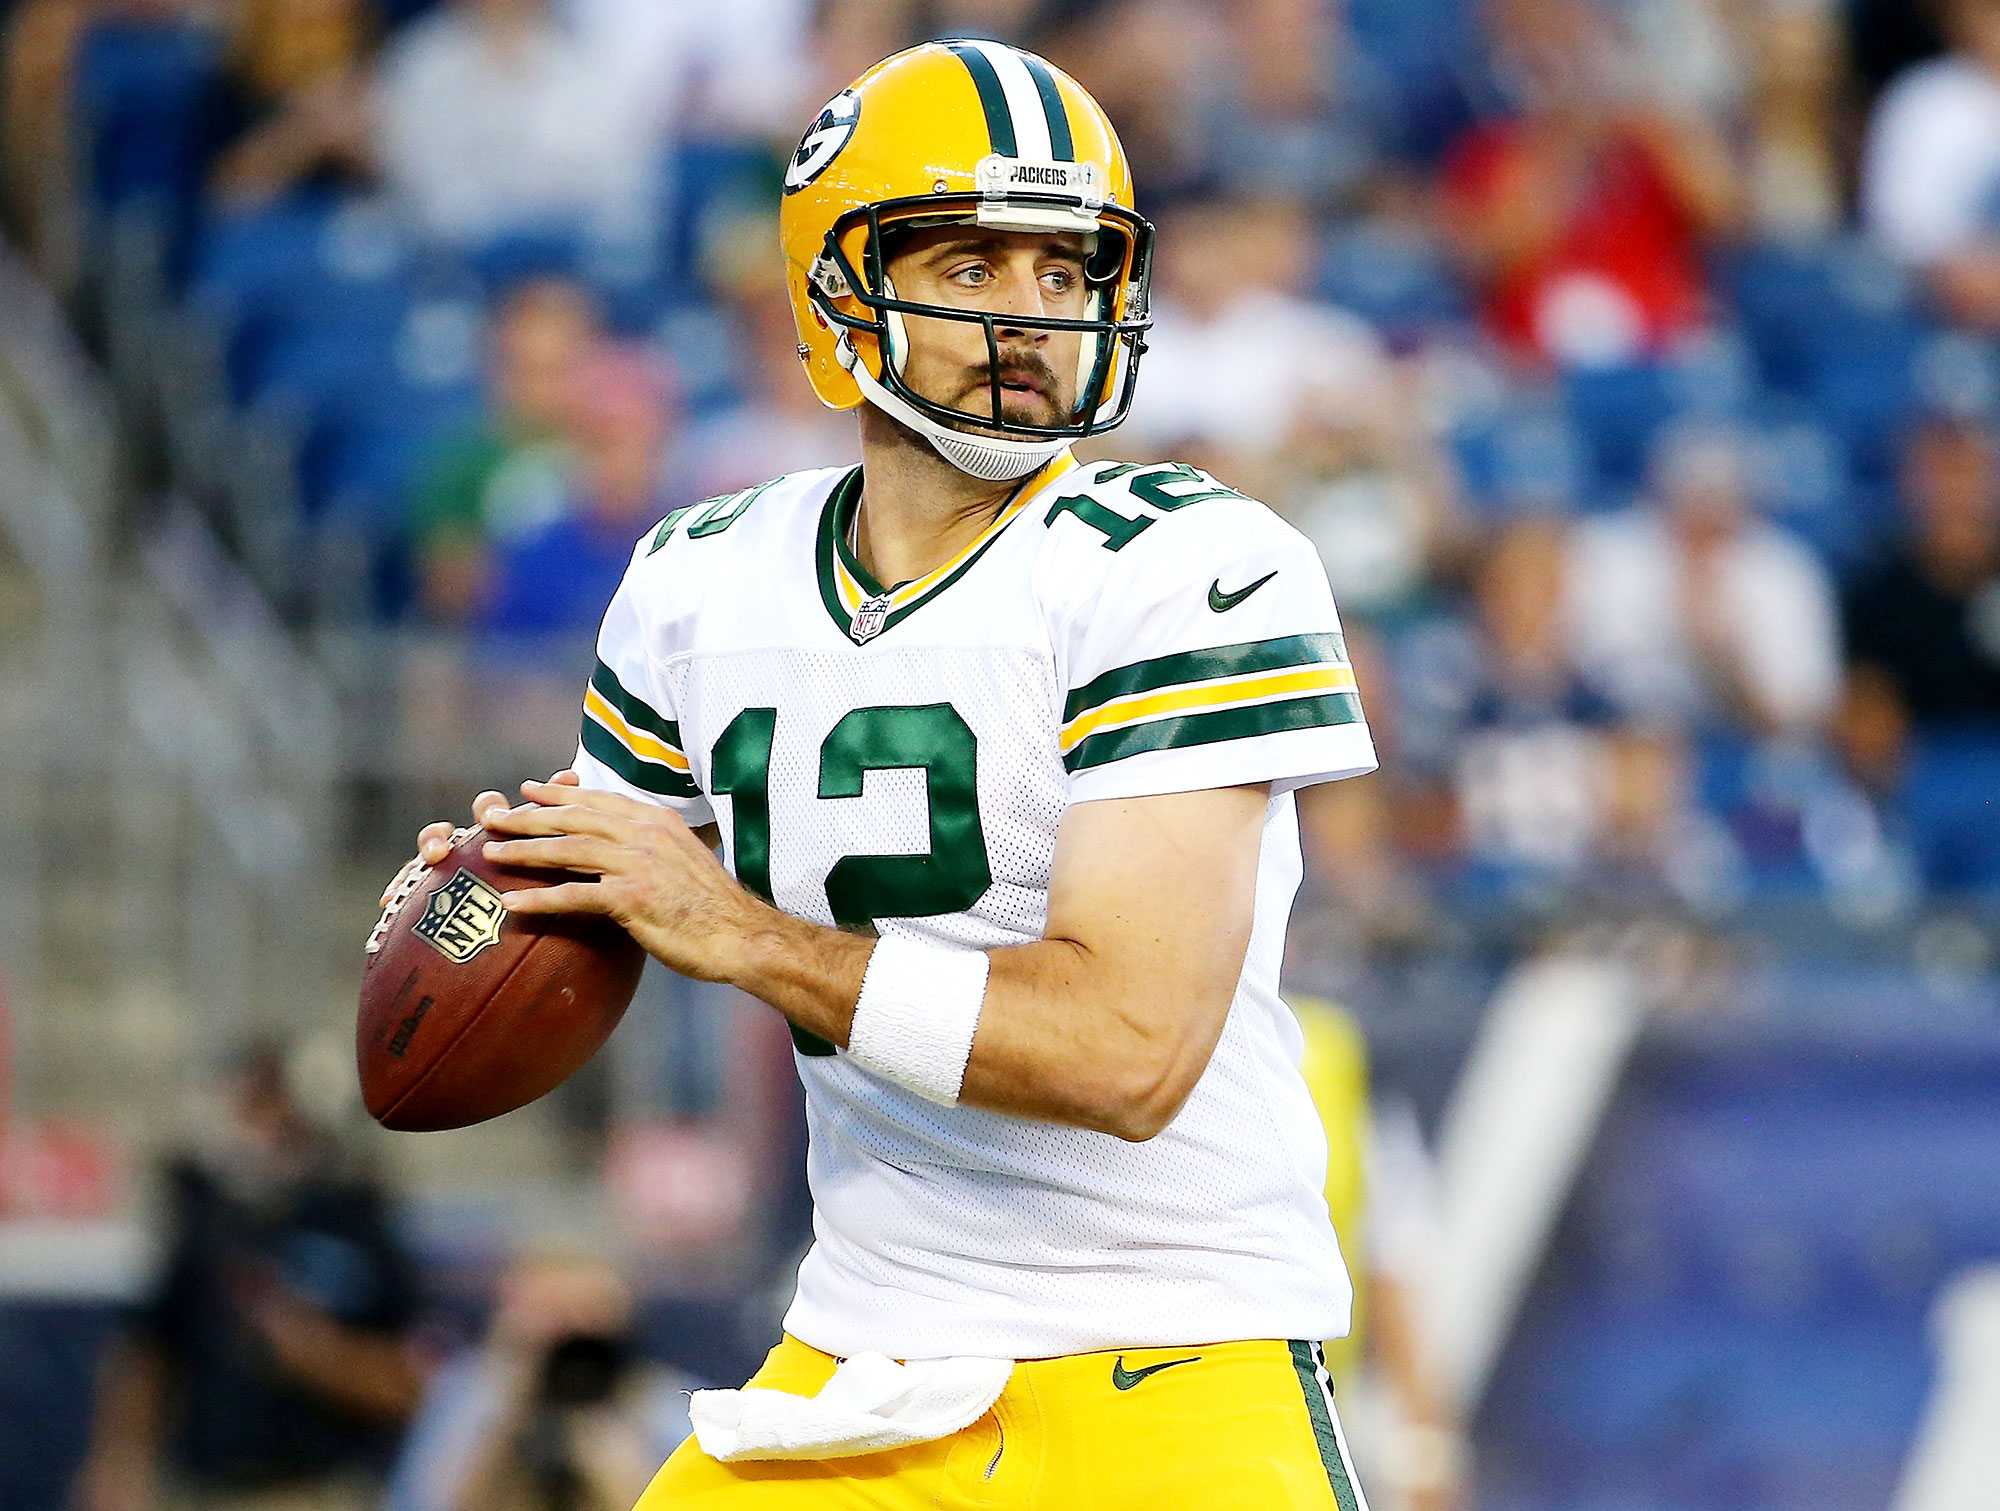  Aaron Rodgers is No Longer a Top Five Quarterback in the NFL